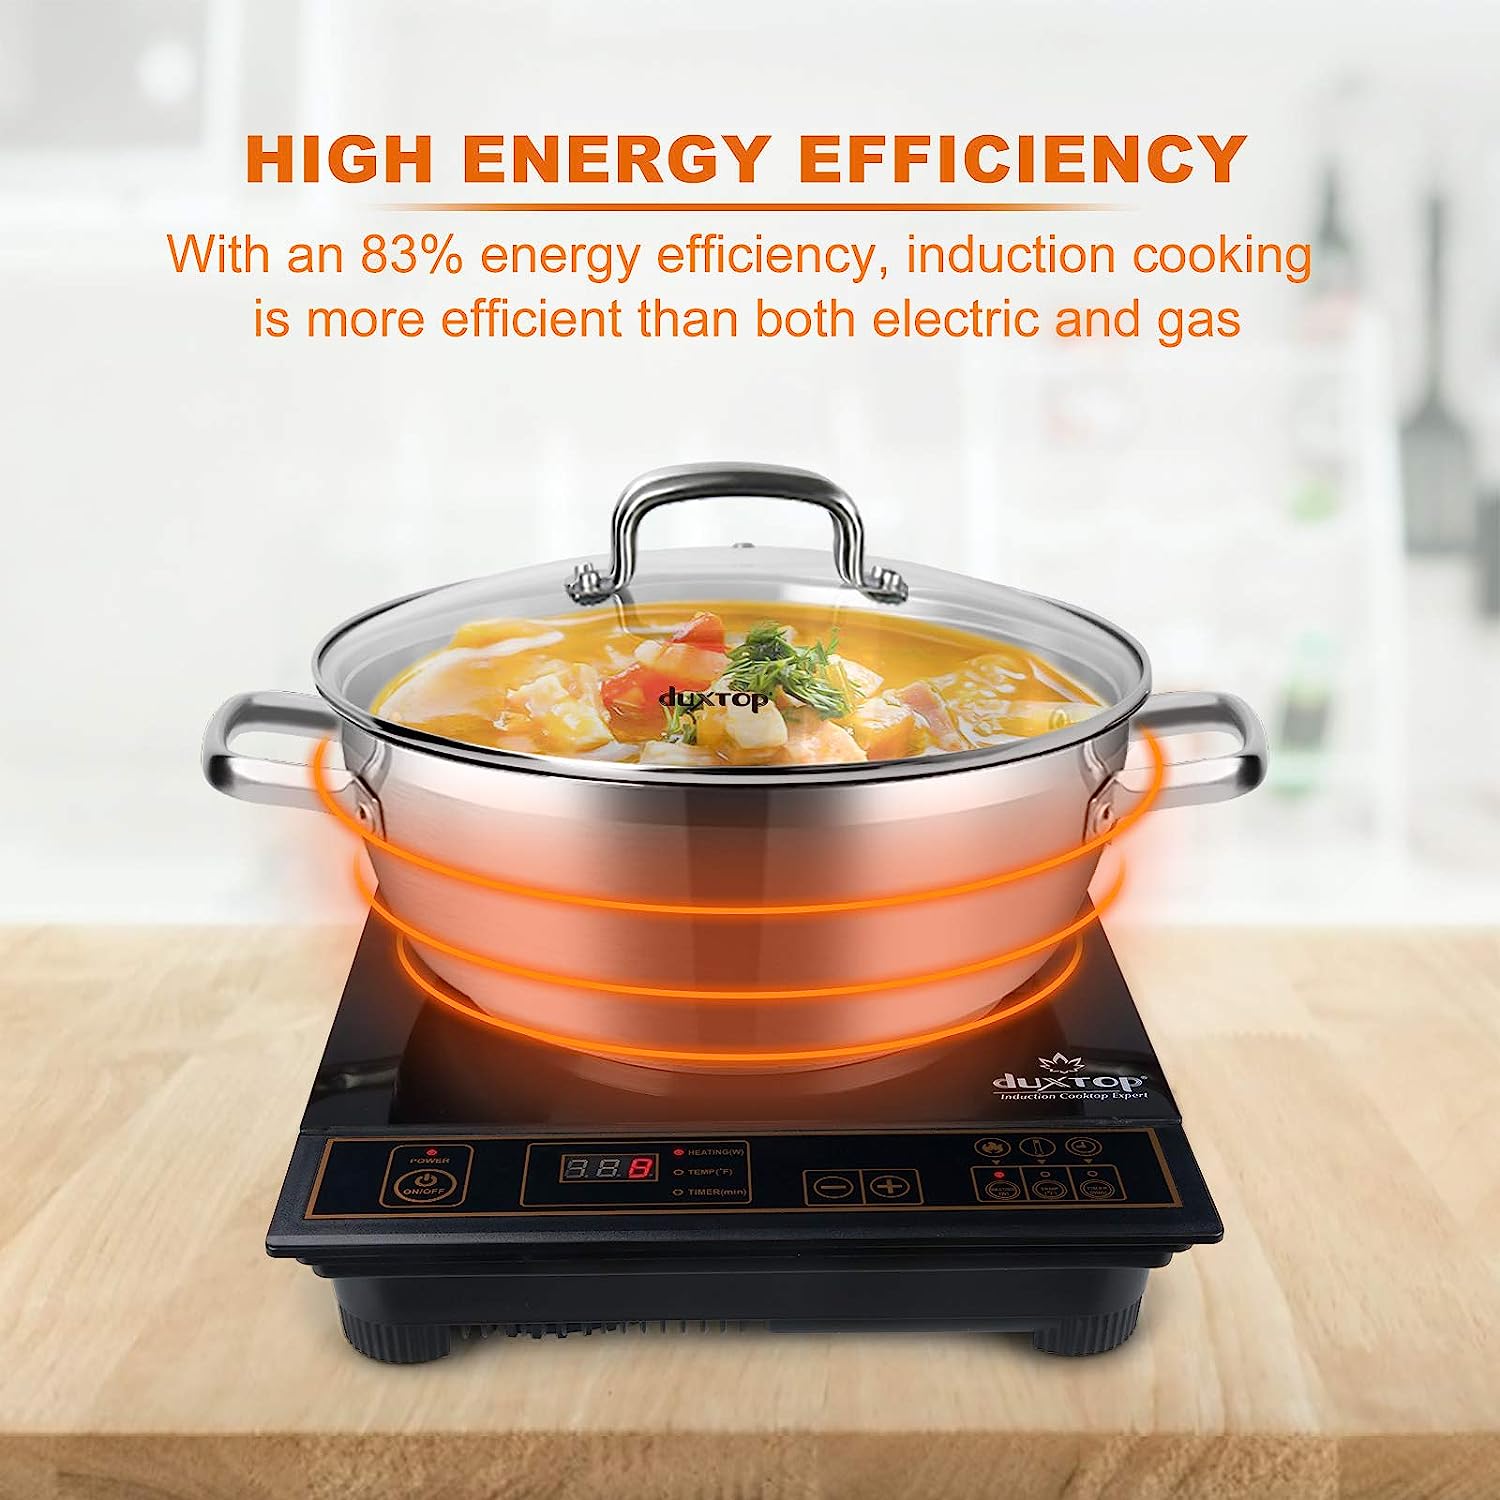 https://bigbigmart.com/wp-content/uploads/2023/07/Duxtop-1800W-Portable-Induction-Cooktop-Countertop-Burner-Included-5.7-Quarts-Professional-Stainless-Steel-Cooking-Pot-with-Lid-Heavy-Impact-bonded-Bottom2.jpg